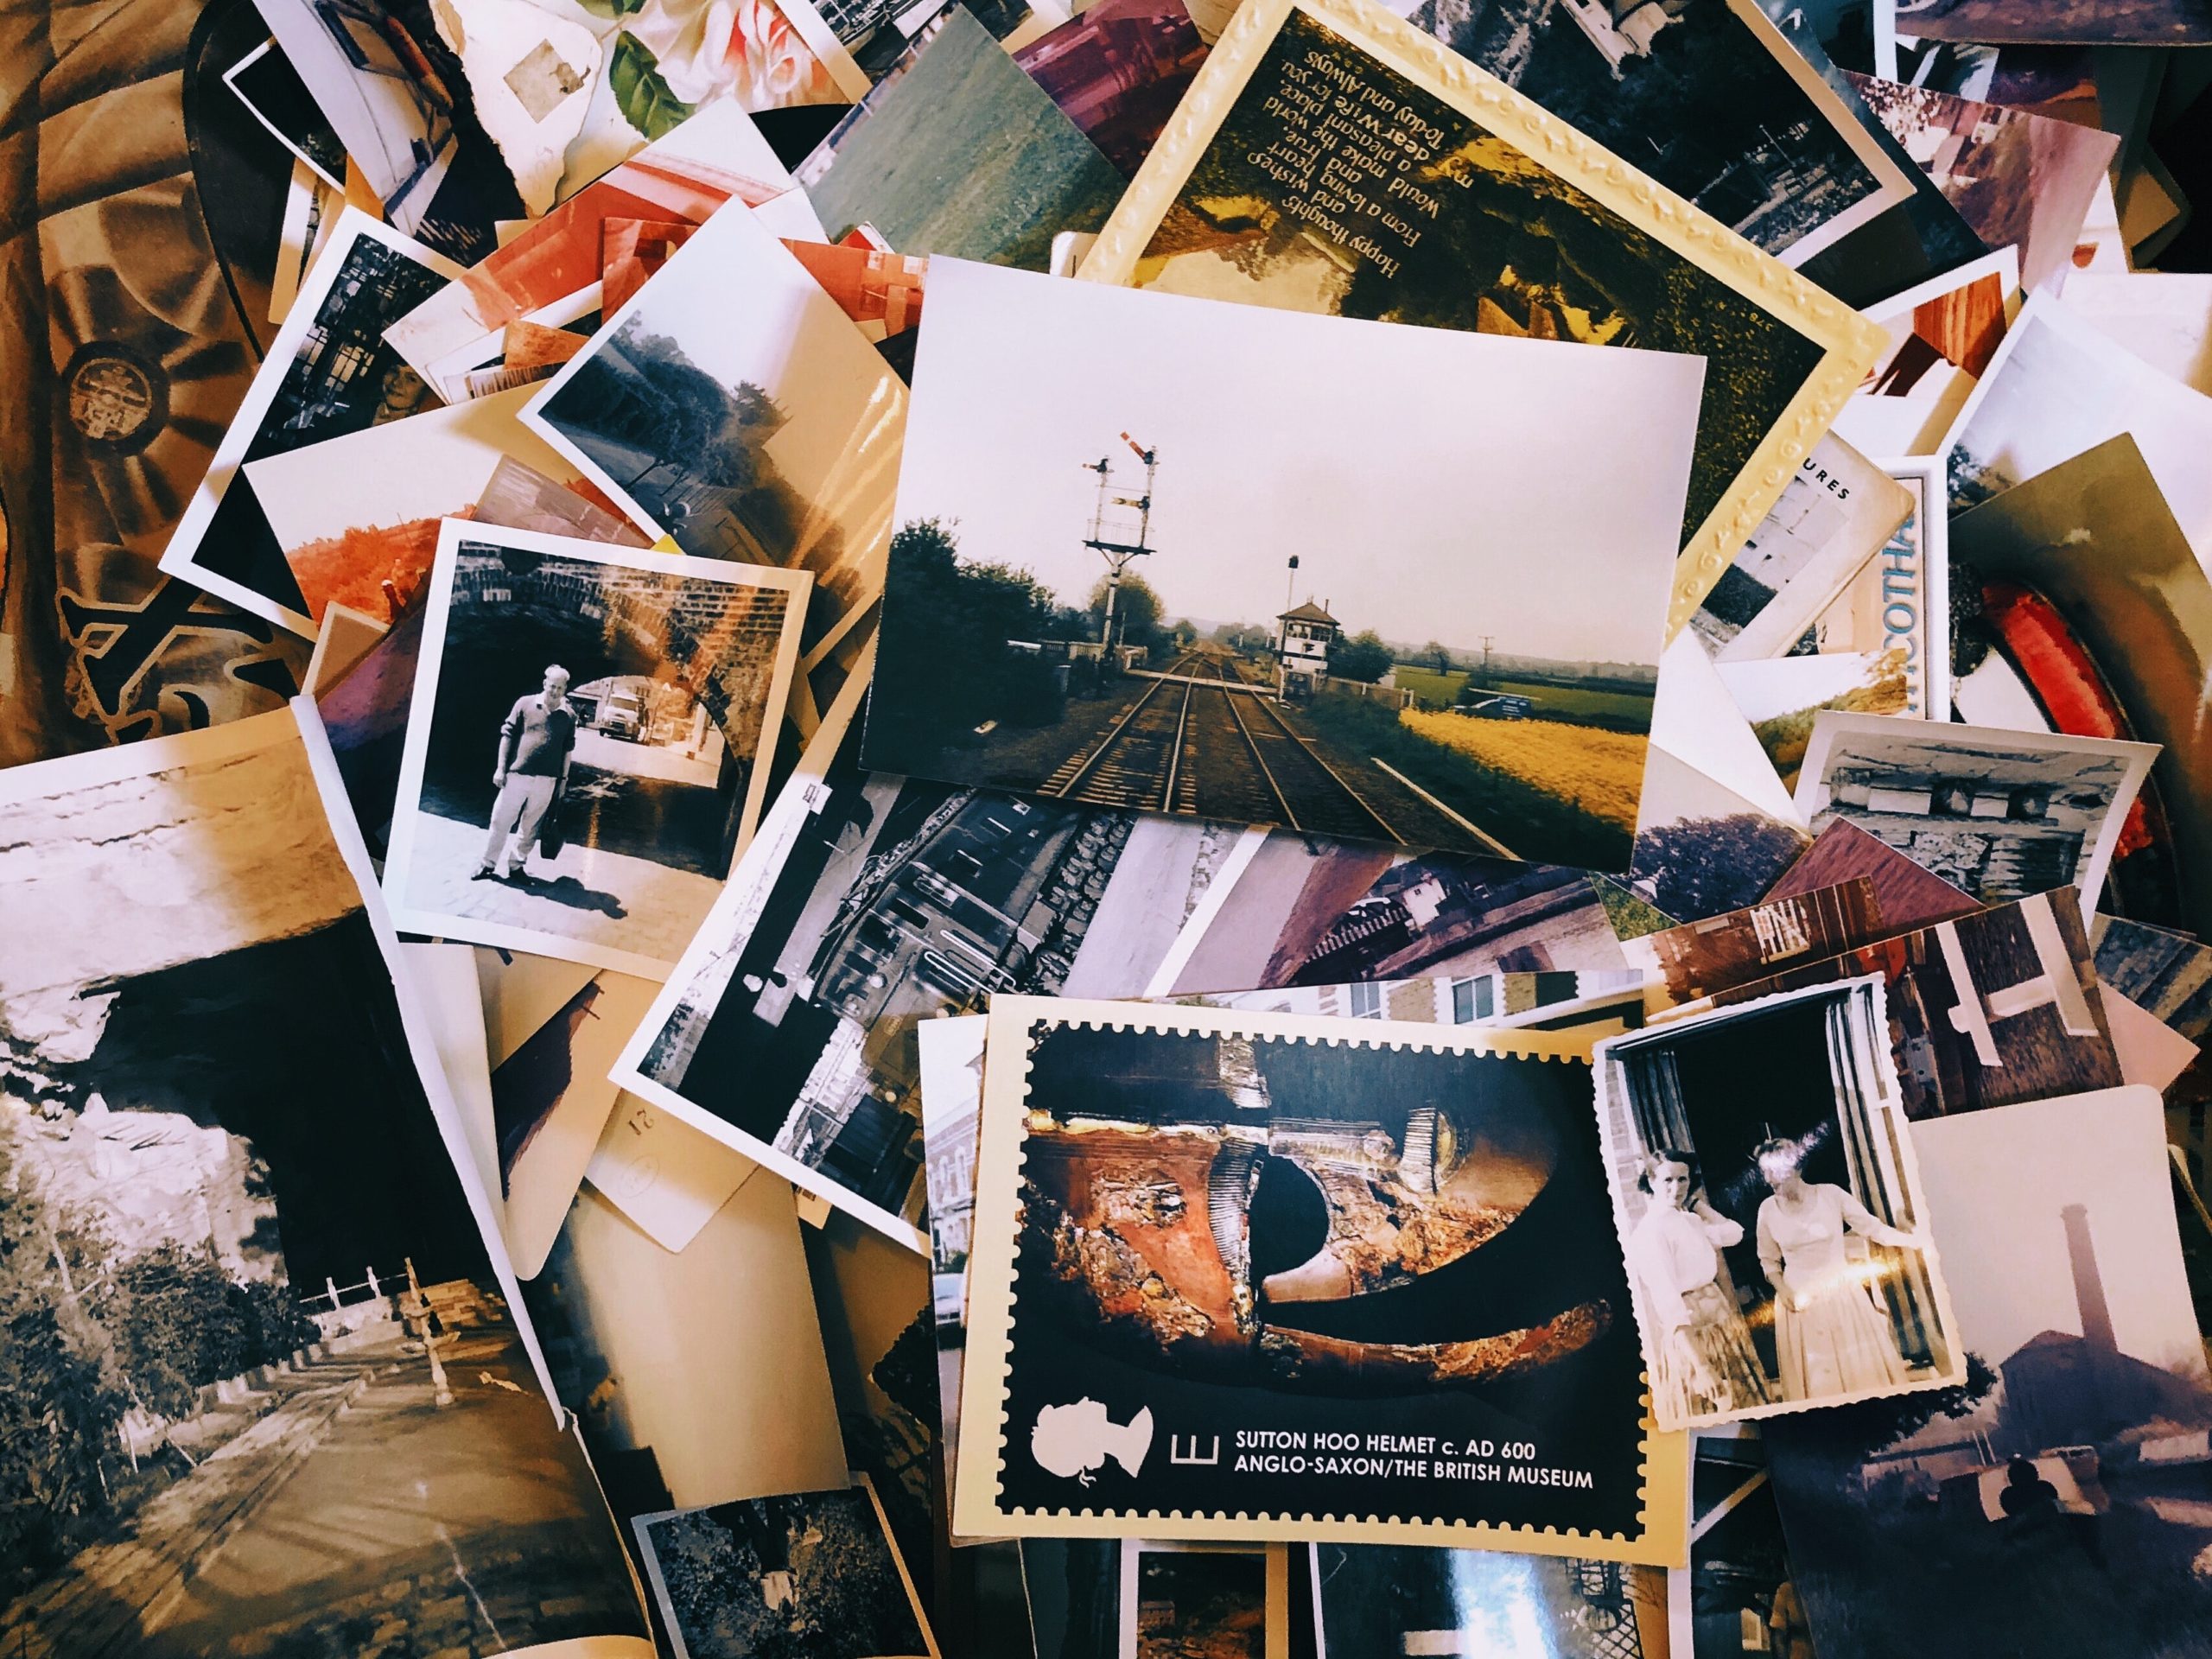 A pile of photographs on a table.